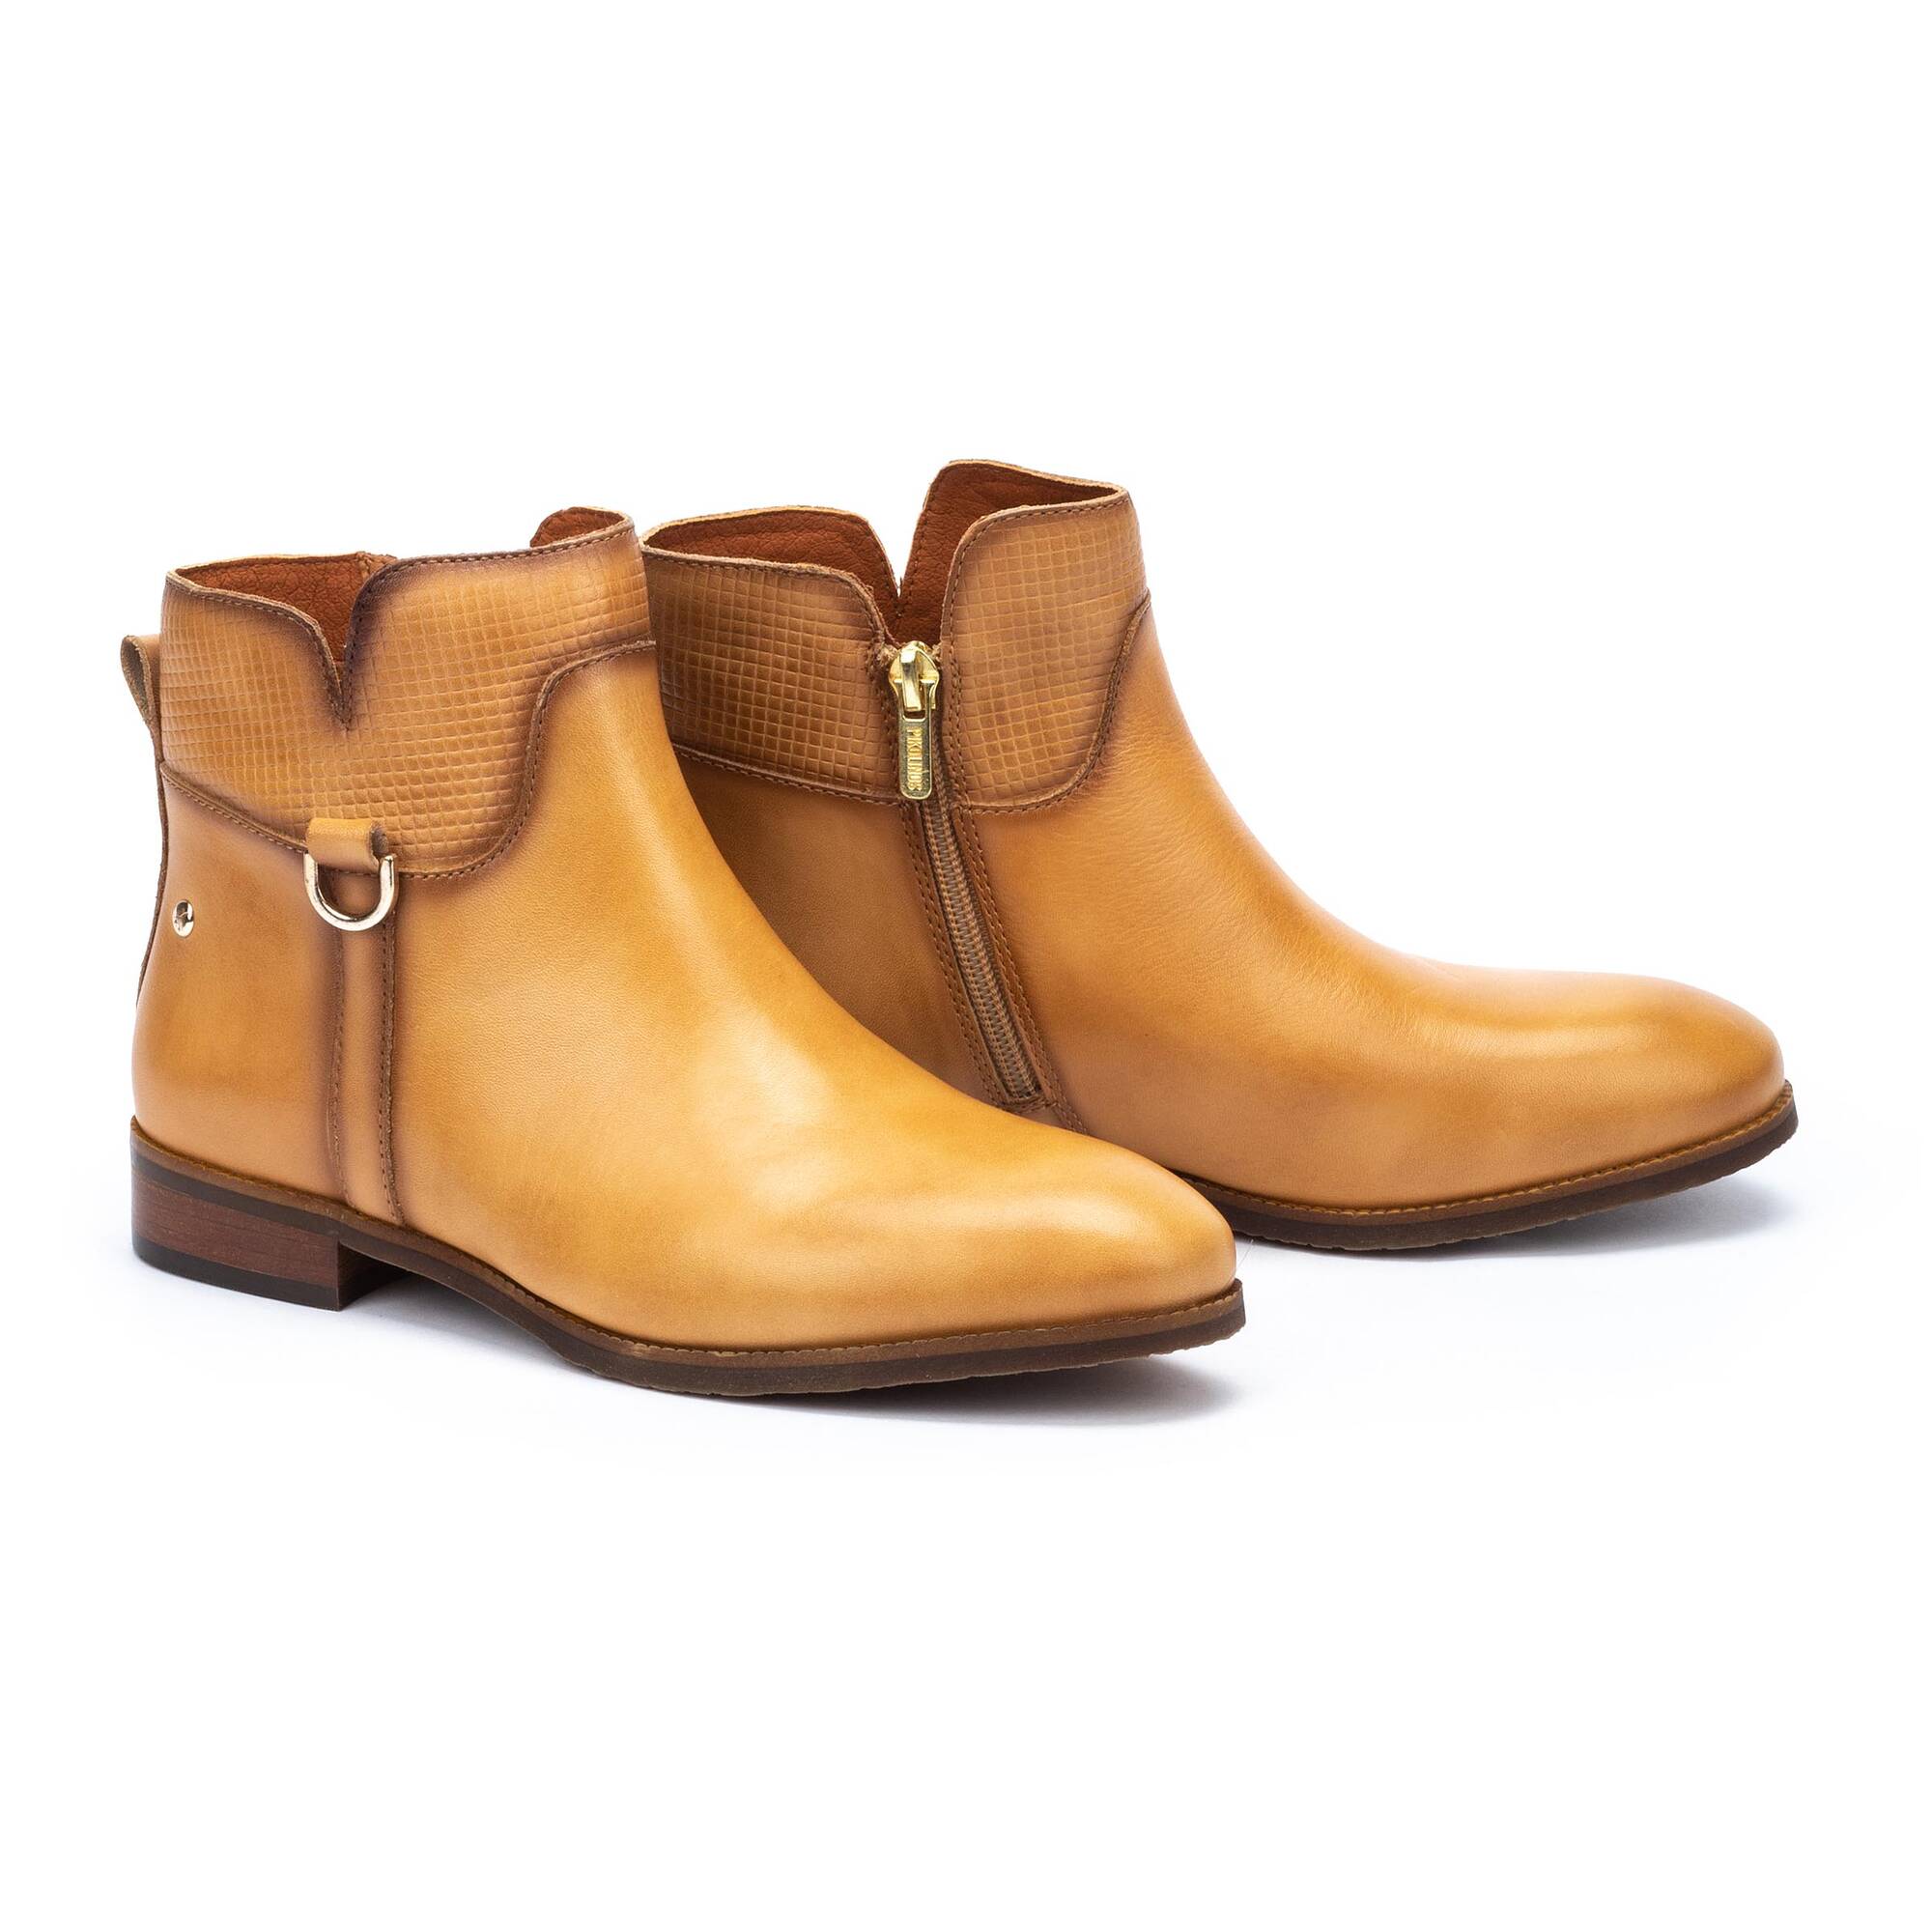 Ankle boots | ROYAL W4D-8530, ALMOND, large image number 100 | null